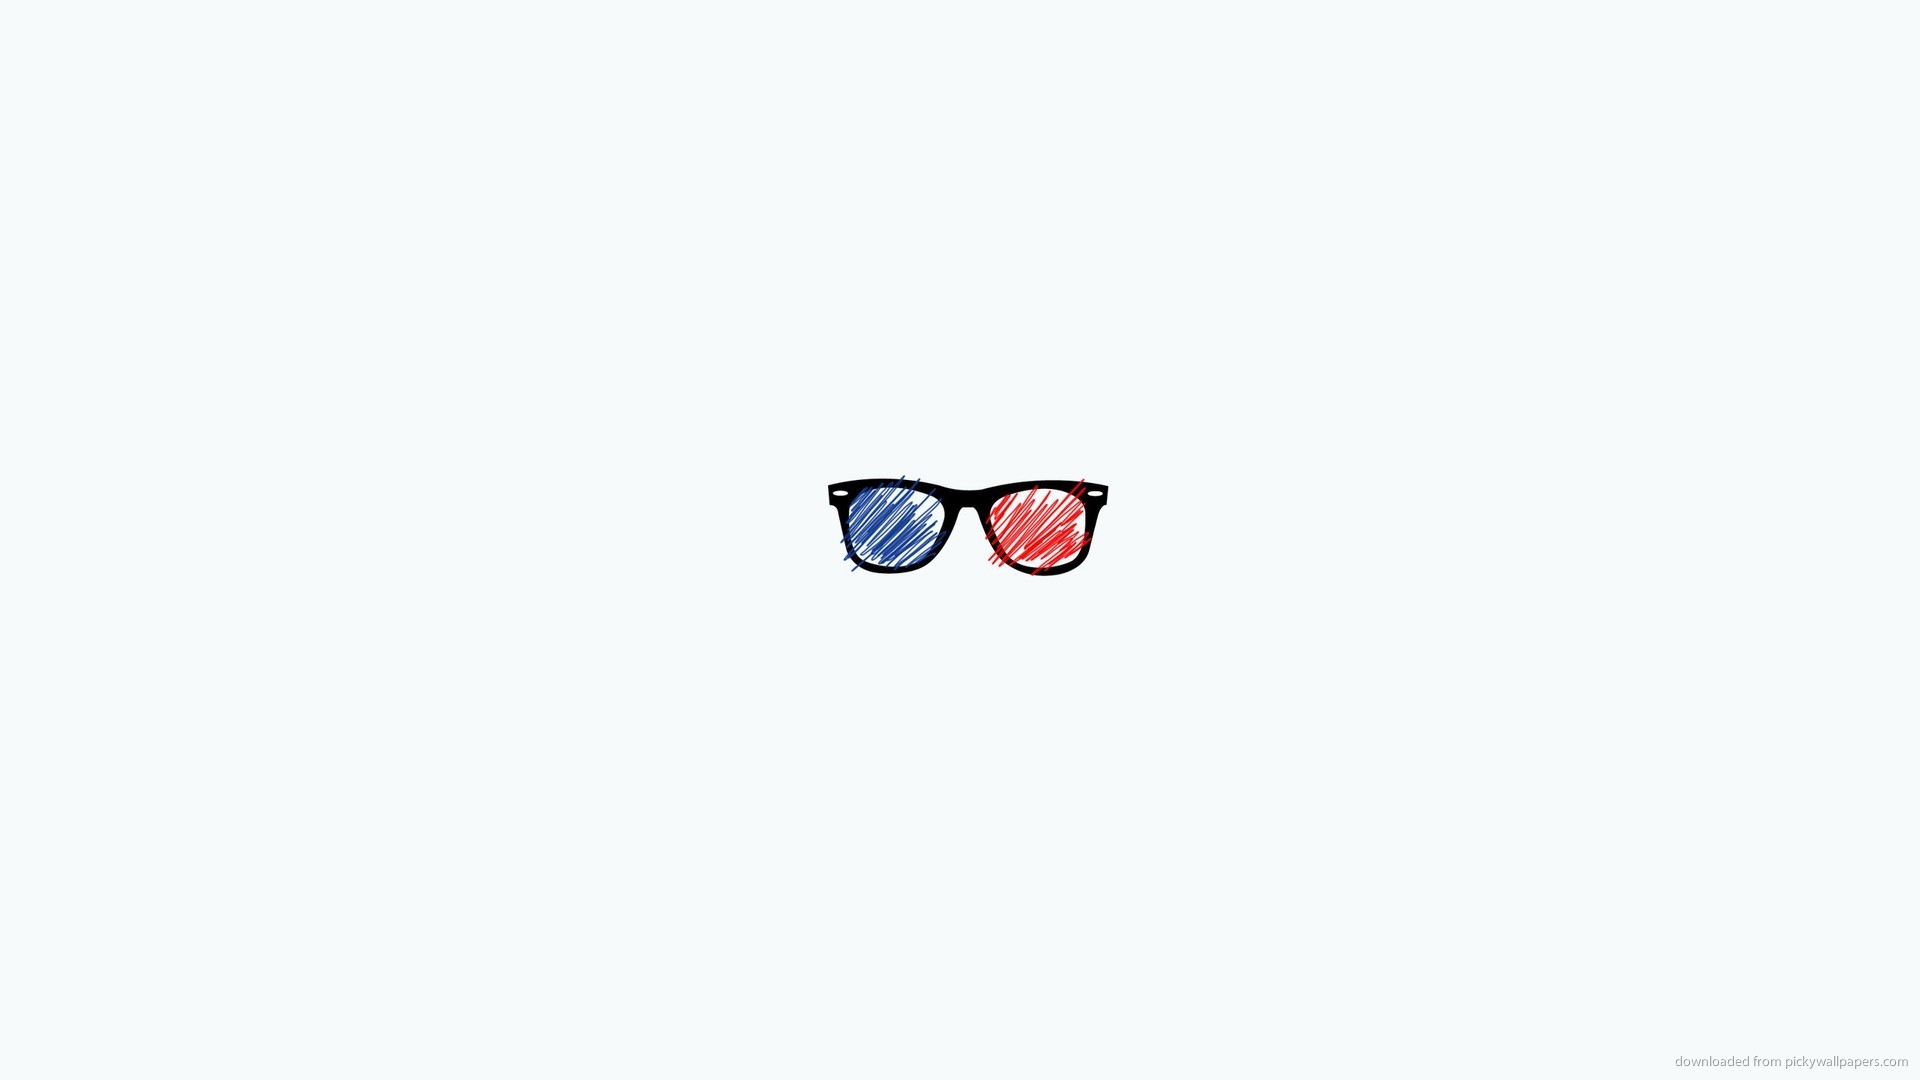 750+ Sunglasses HD Wallpapers and Backgrounds